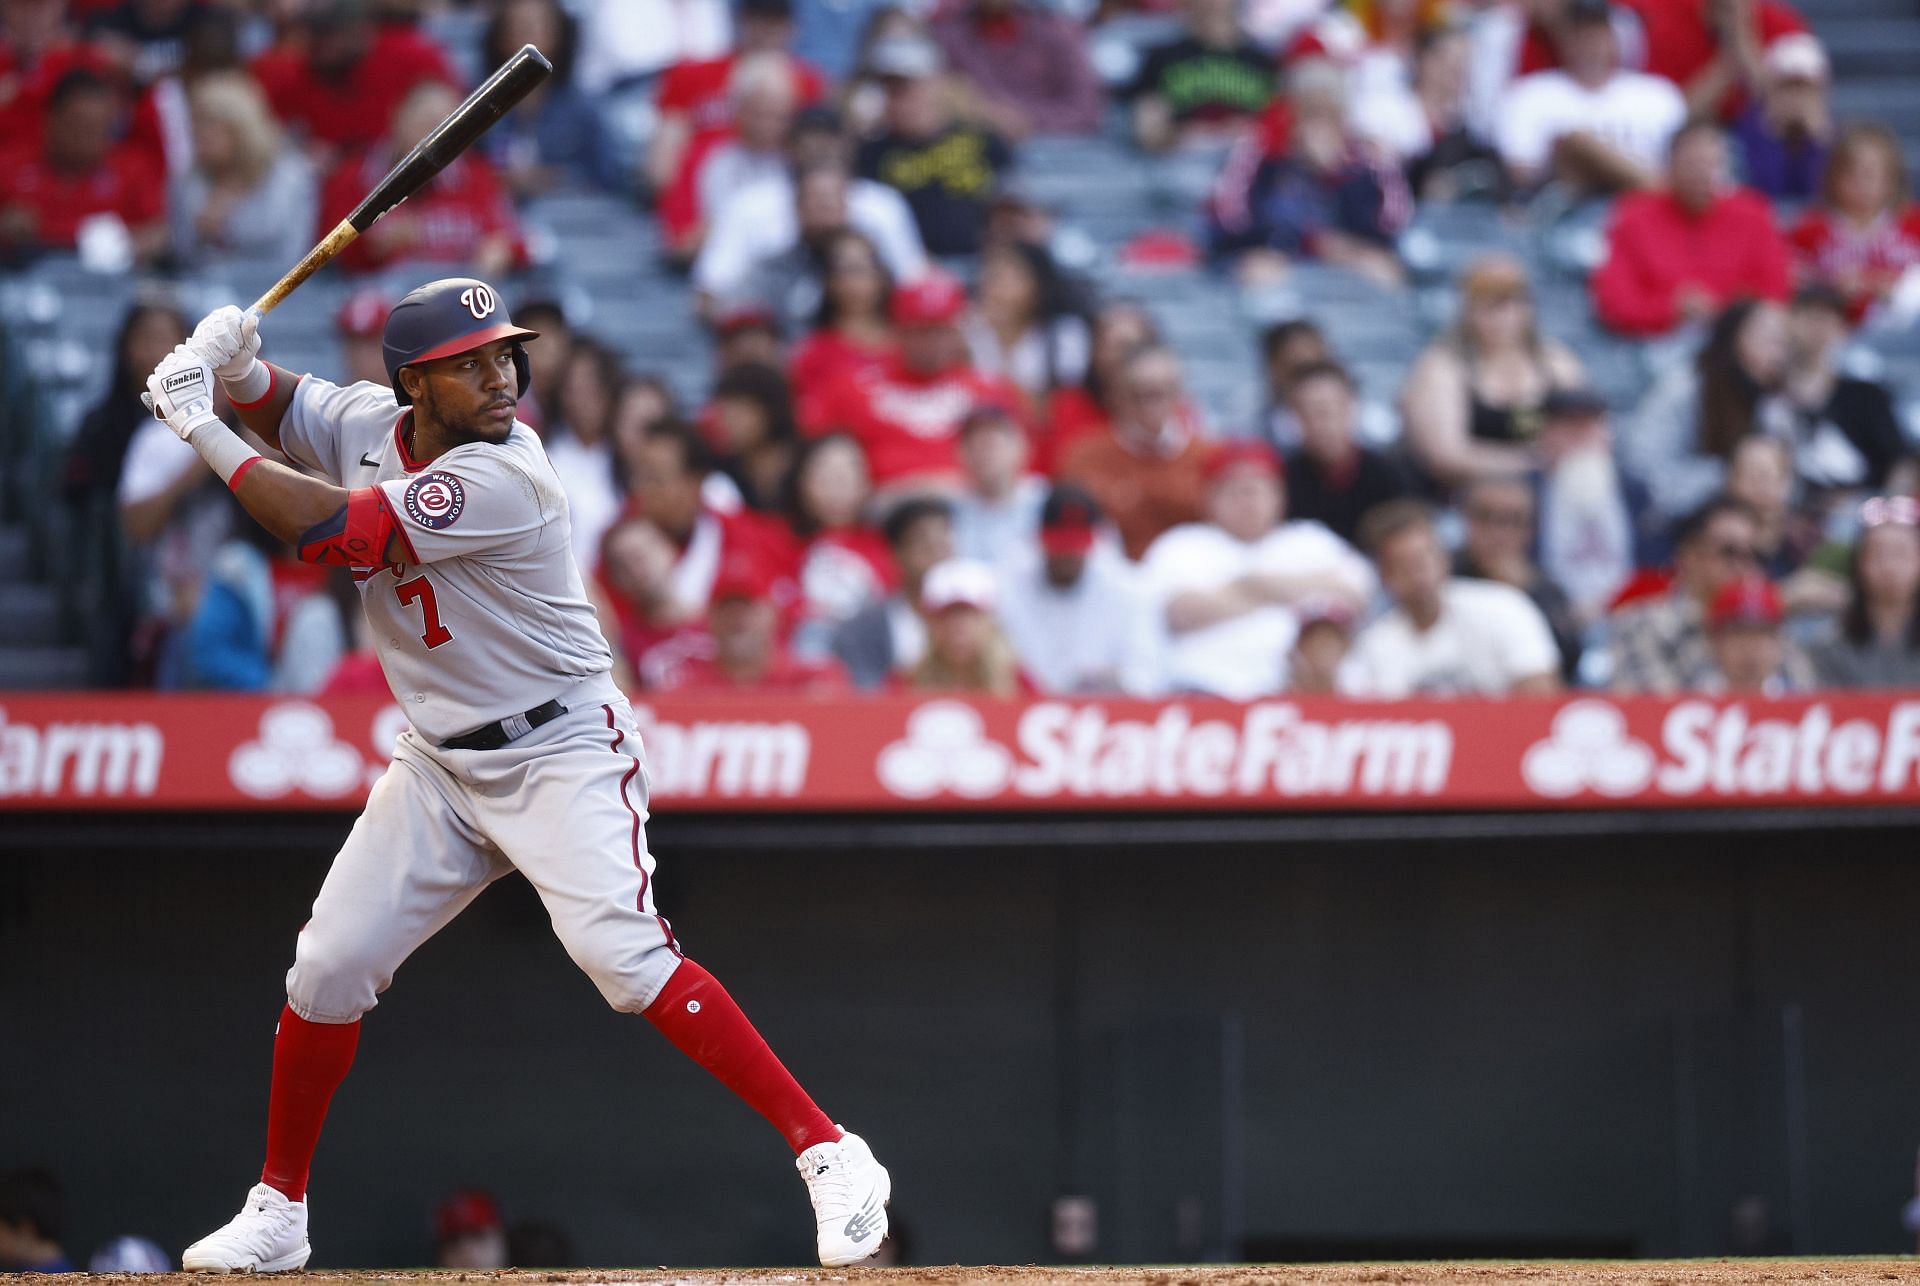 The Washington Nationals Maikel Franco will look to stay hot Wednesday.